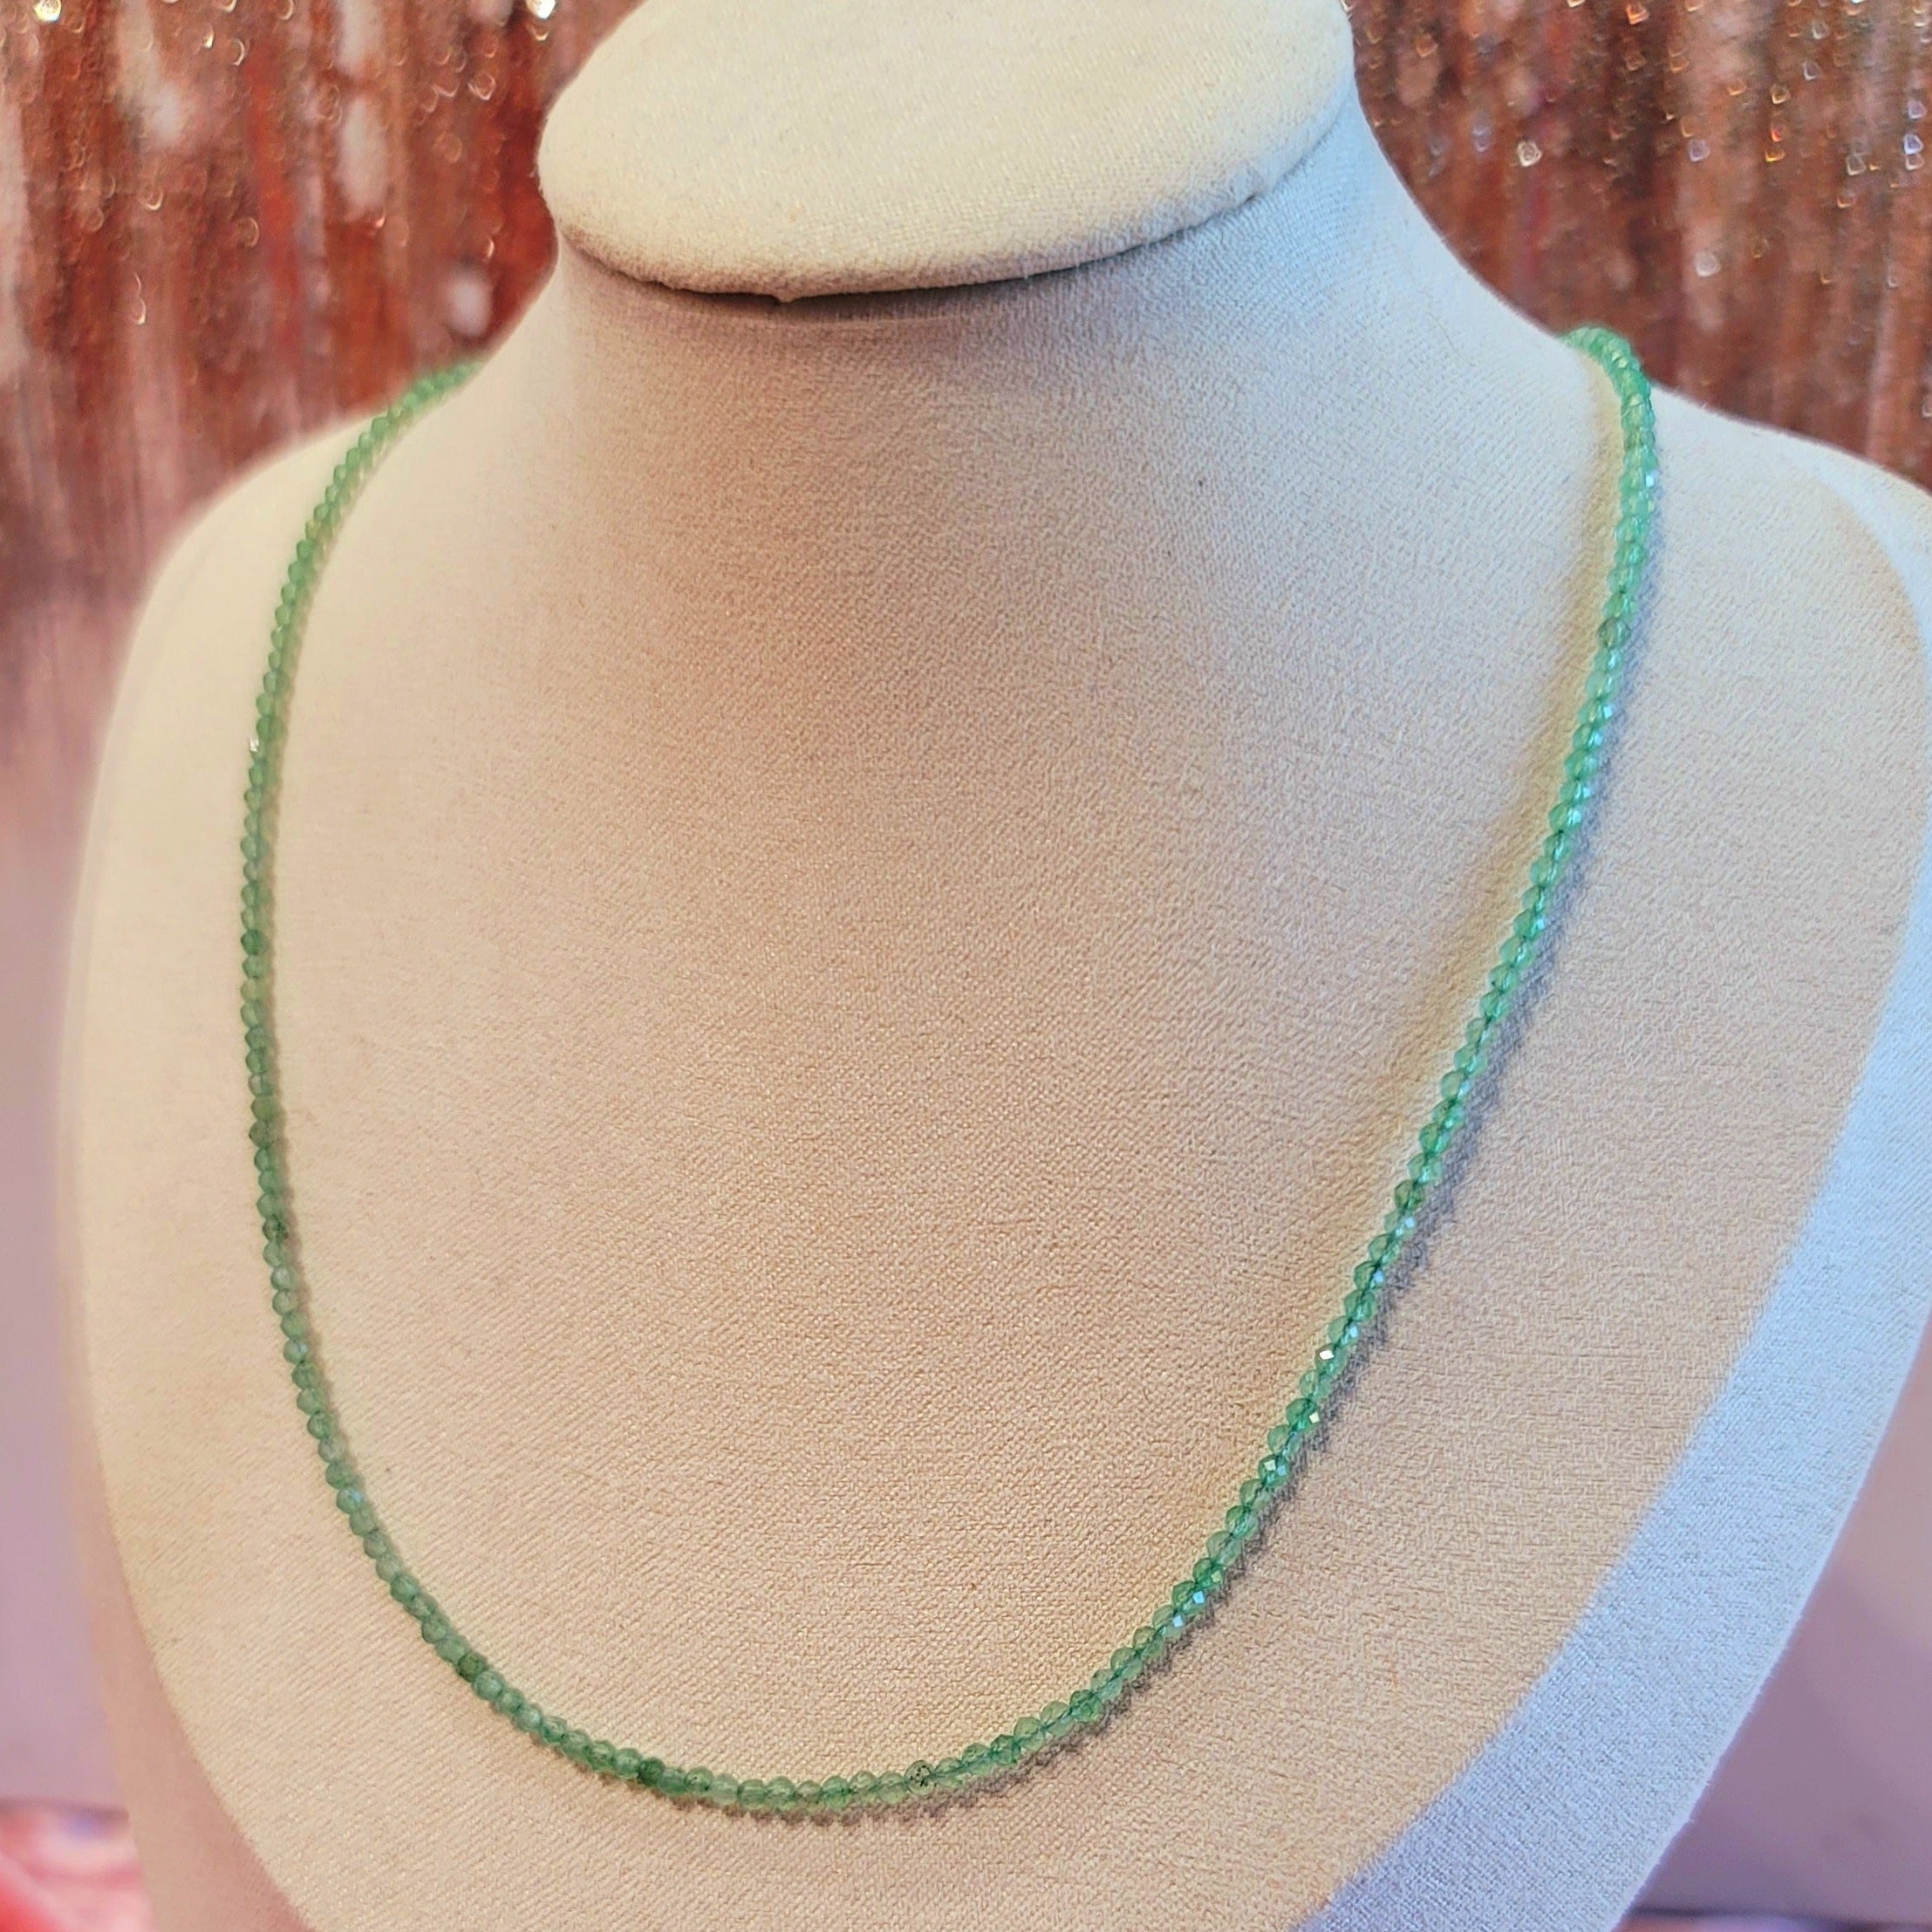 Green Aventurine Micro Faceted Necklace for Abundance, Good Luck and Wellness